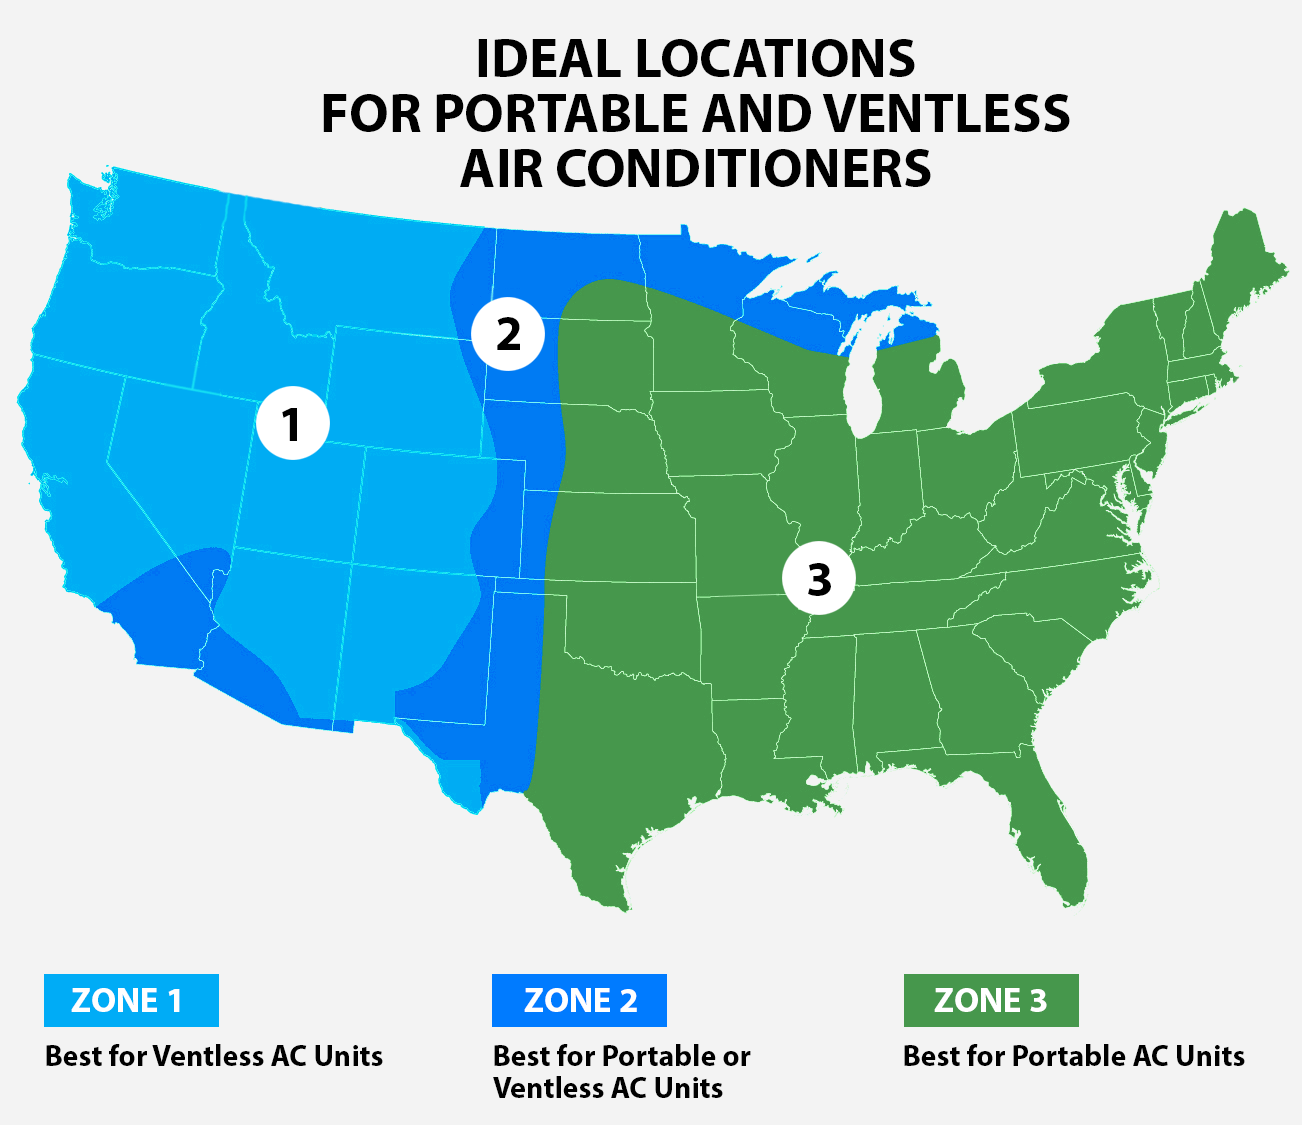 Map showing which regions of the U.S. are best for portable air conditioners versus ventless air conditioners